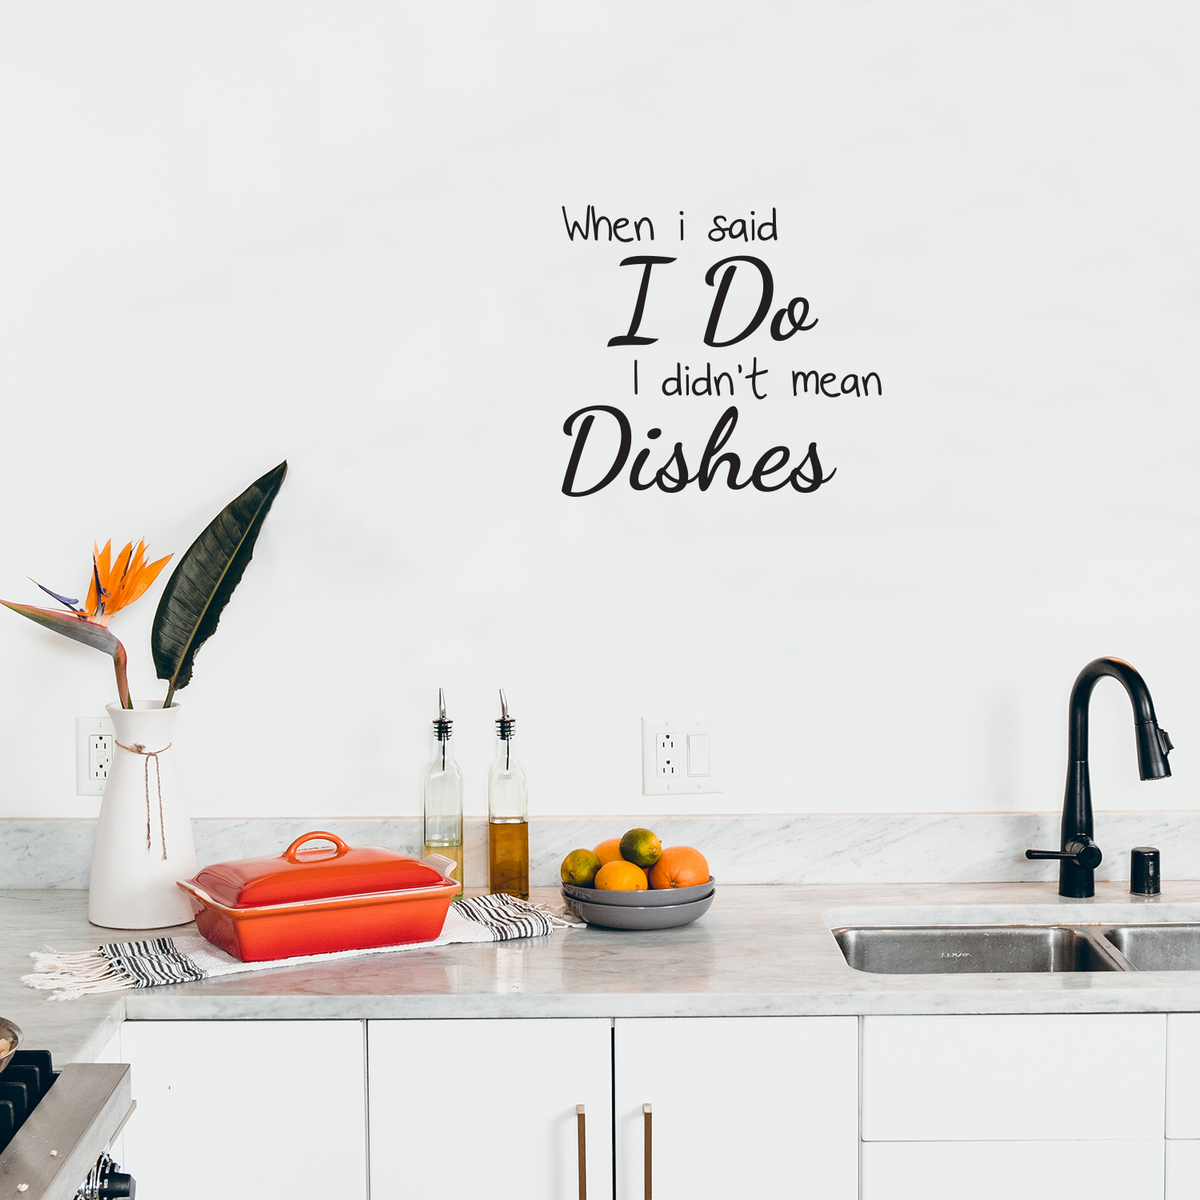 When I Said I Do I Didn't Mean The Dishes - Kitchen Quotes Wall Art Vi